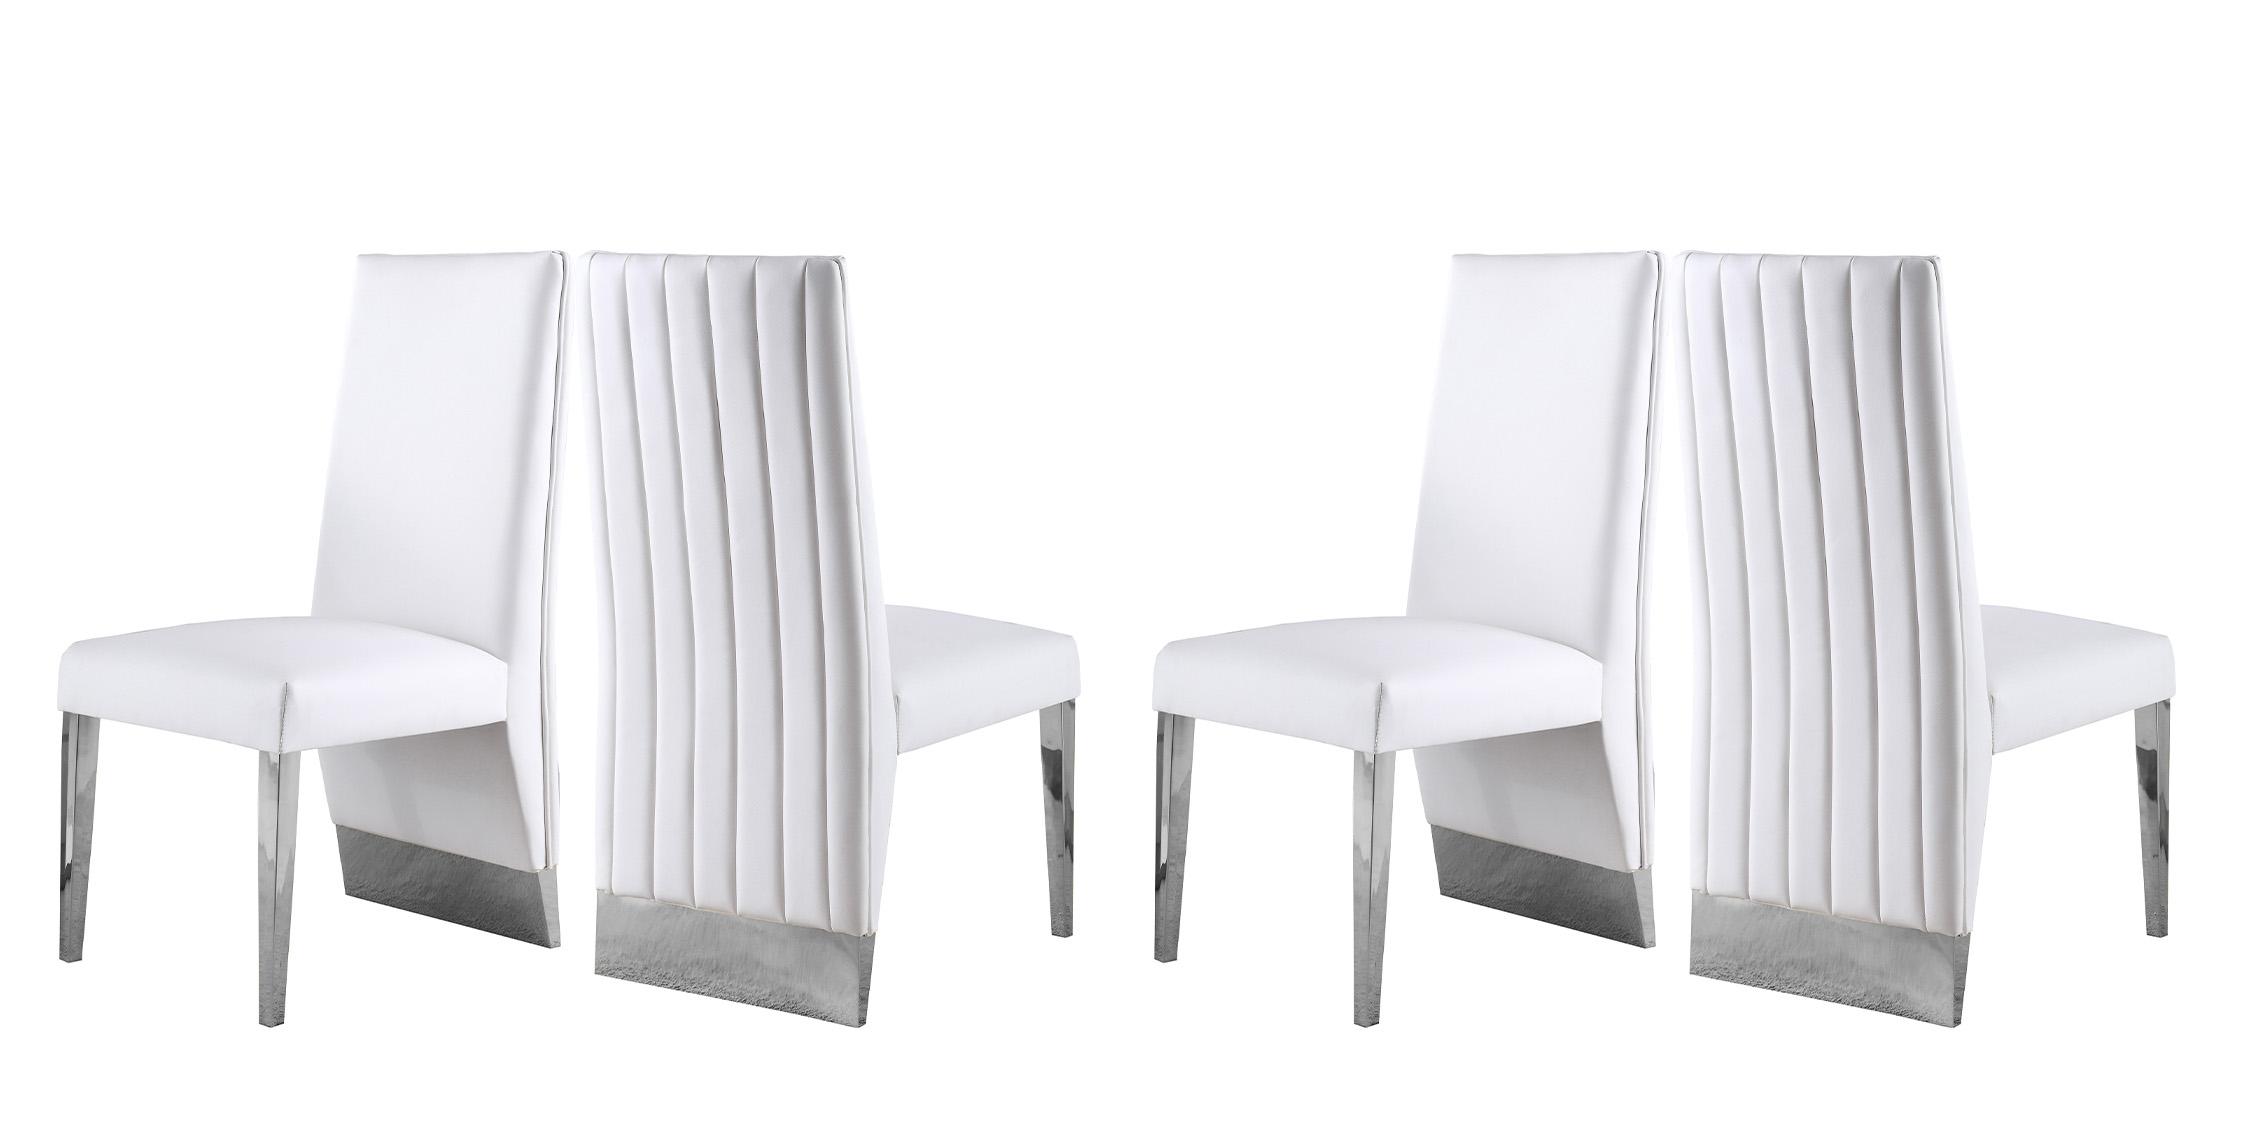 Contemporary, Modern Dining Side Chair PORSHA 750White-C 750White-C-Set-4 in Chrome, White Faux Leather